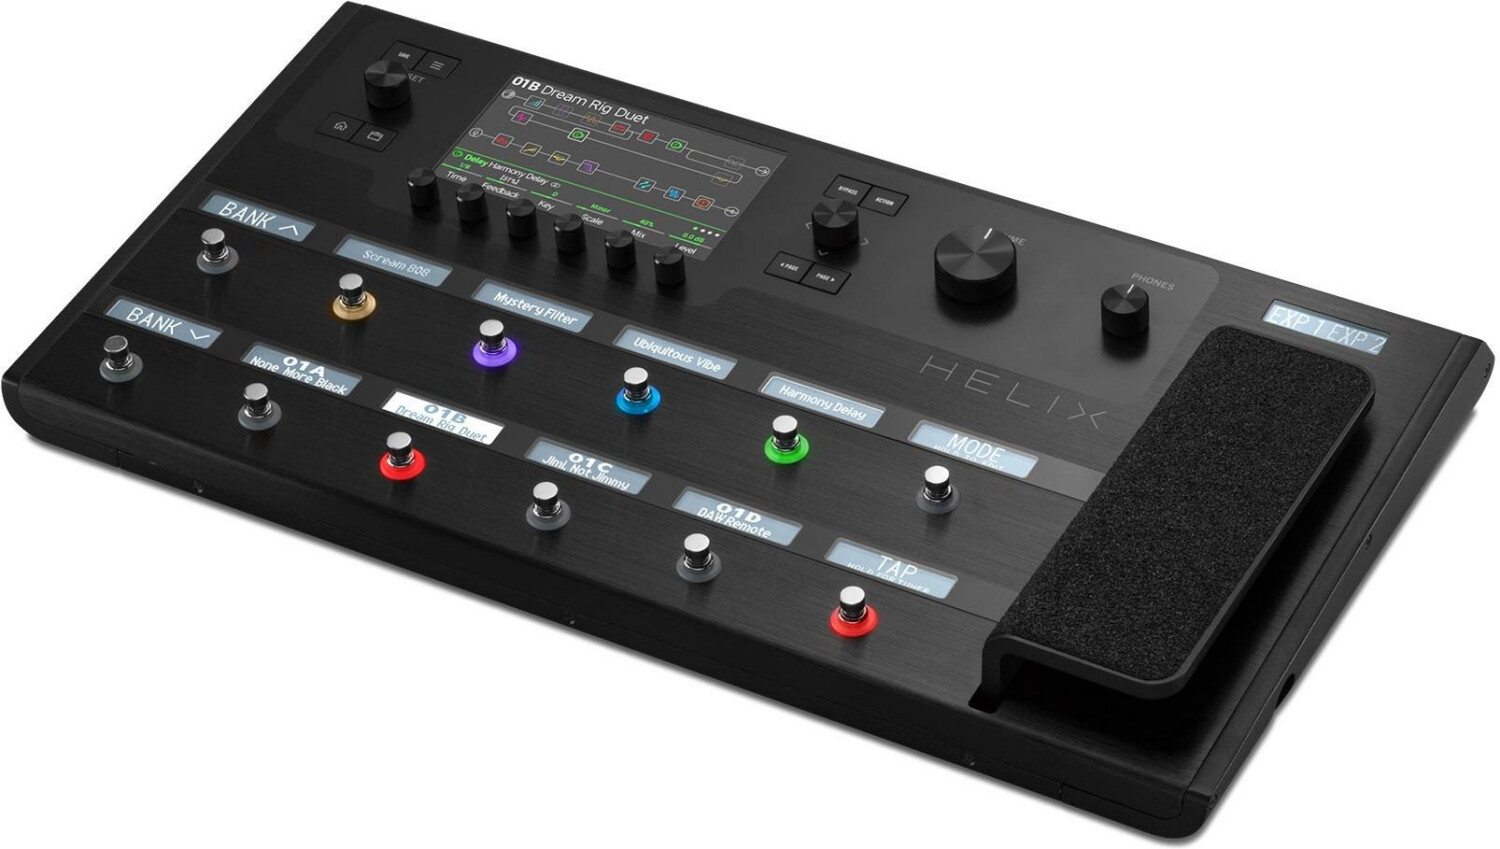 Buy Line 6 Helix from £1,199.00 (Today) – Best Deals on idealo.co.uk